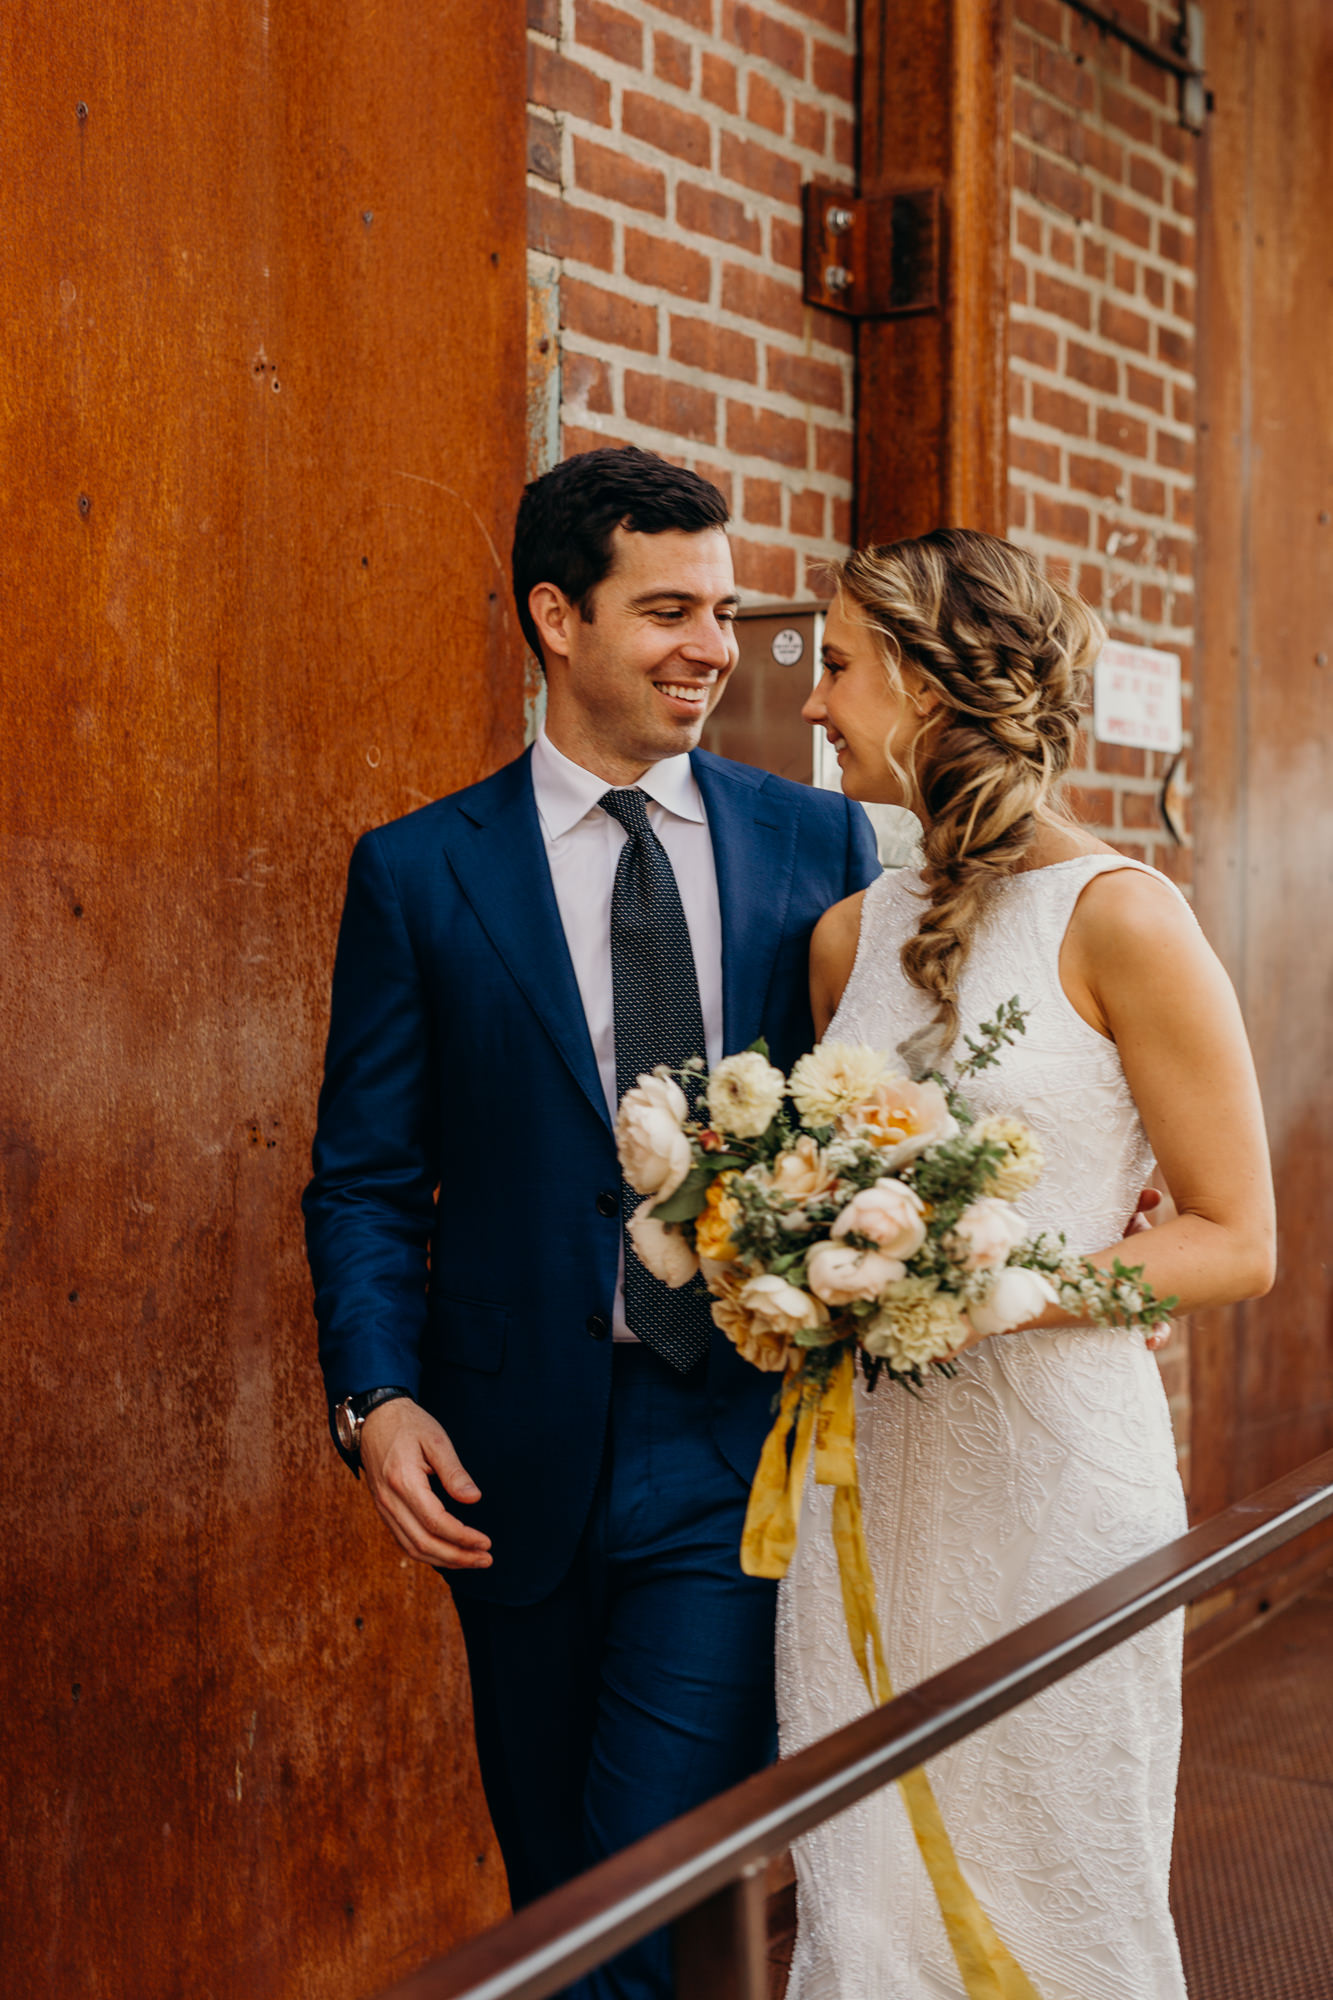 a portrait of a bride and groom at the wythe hotel in brooklyn, new york city